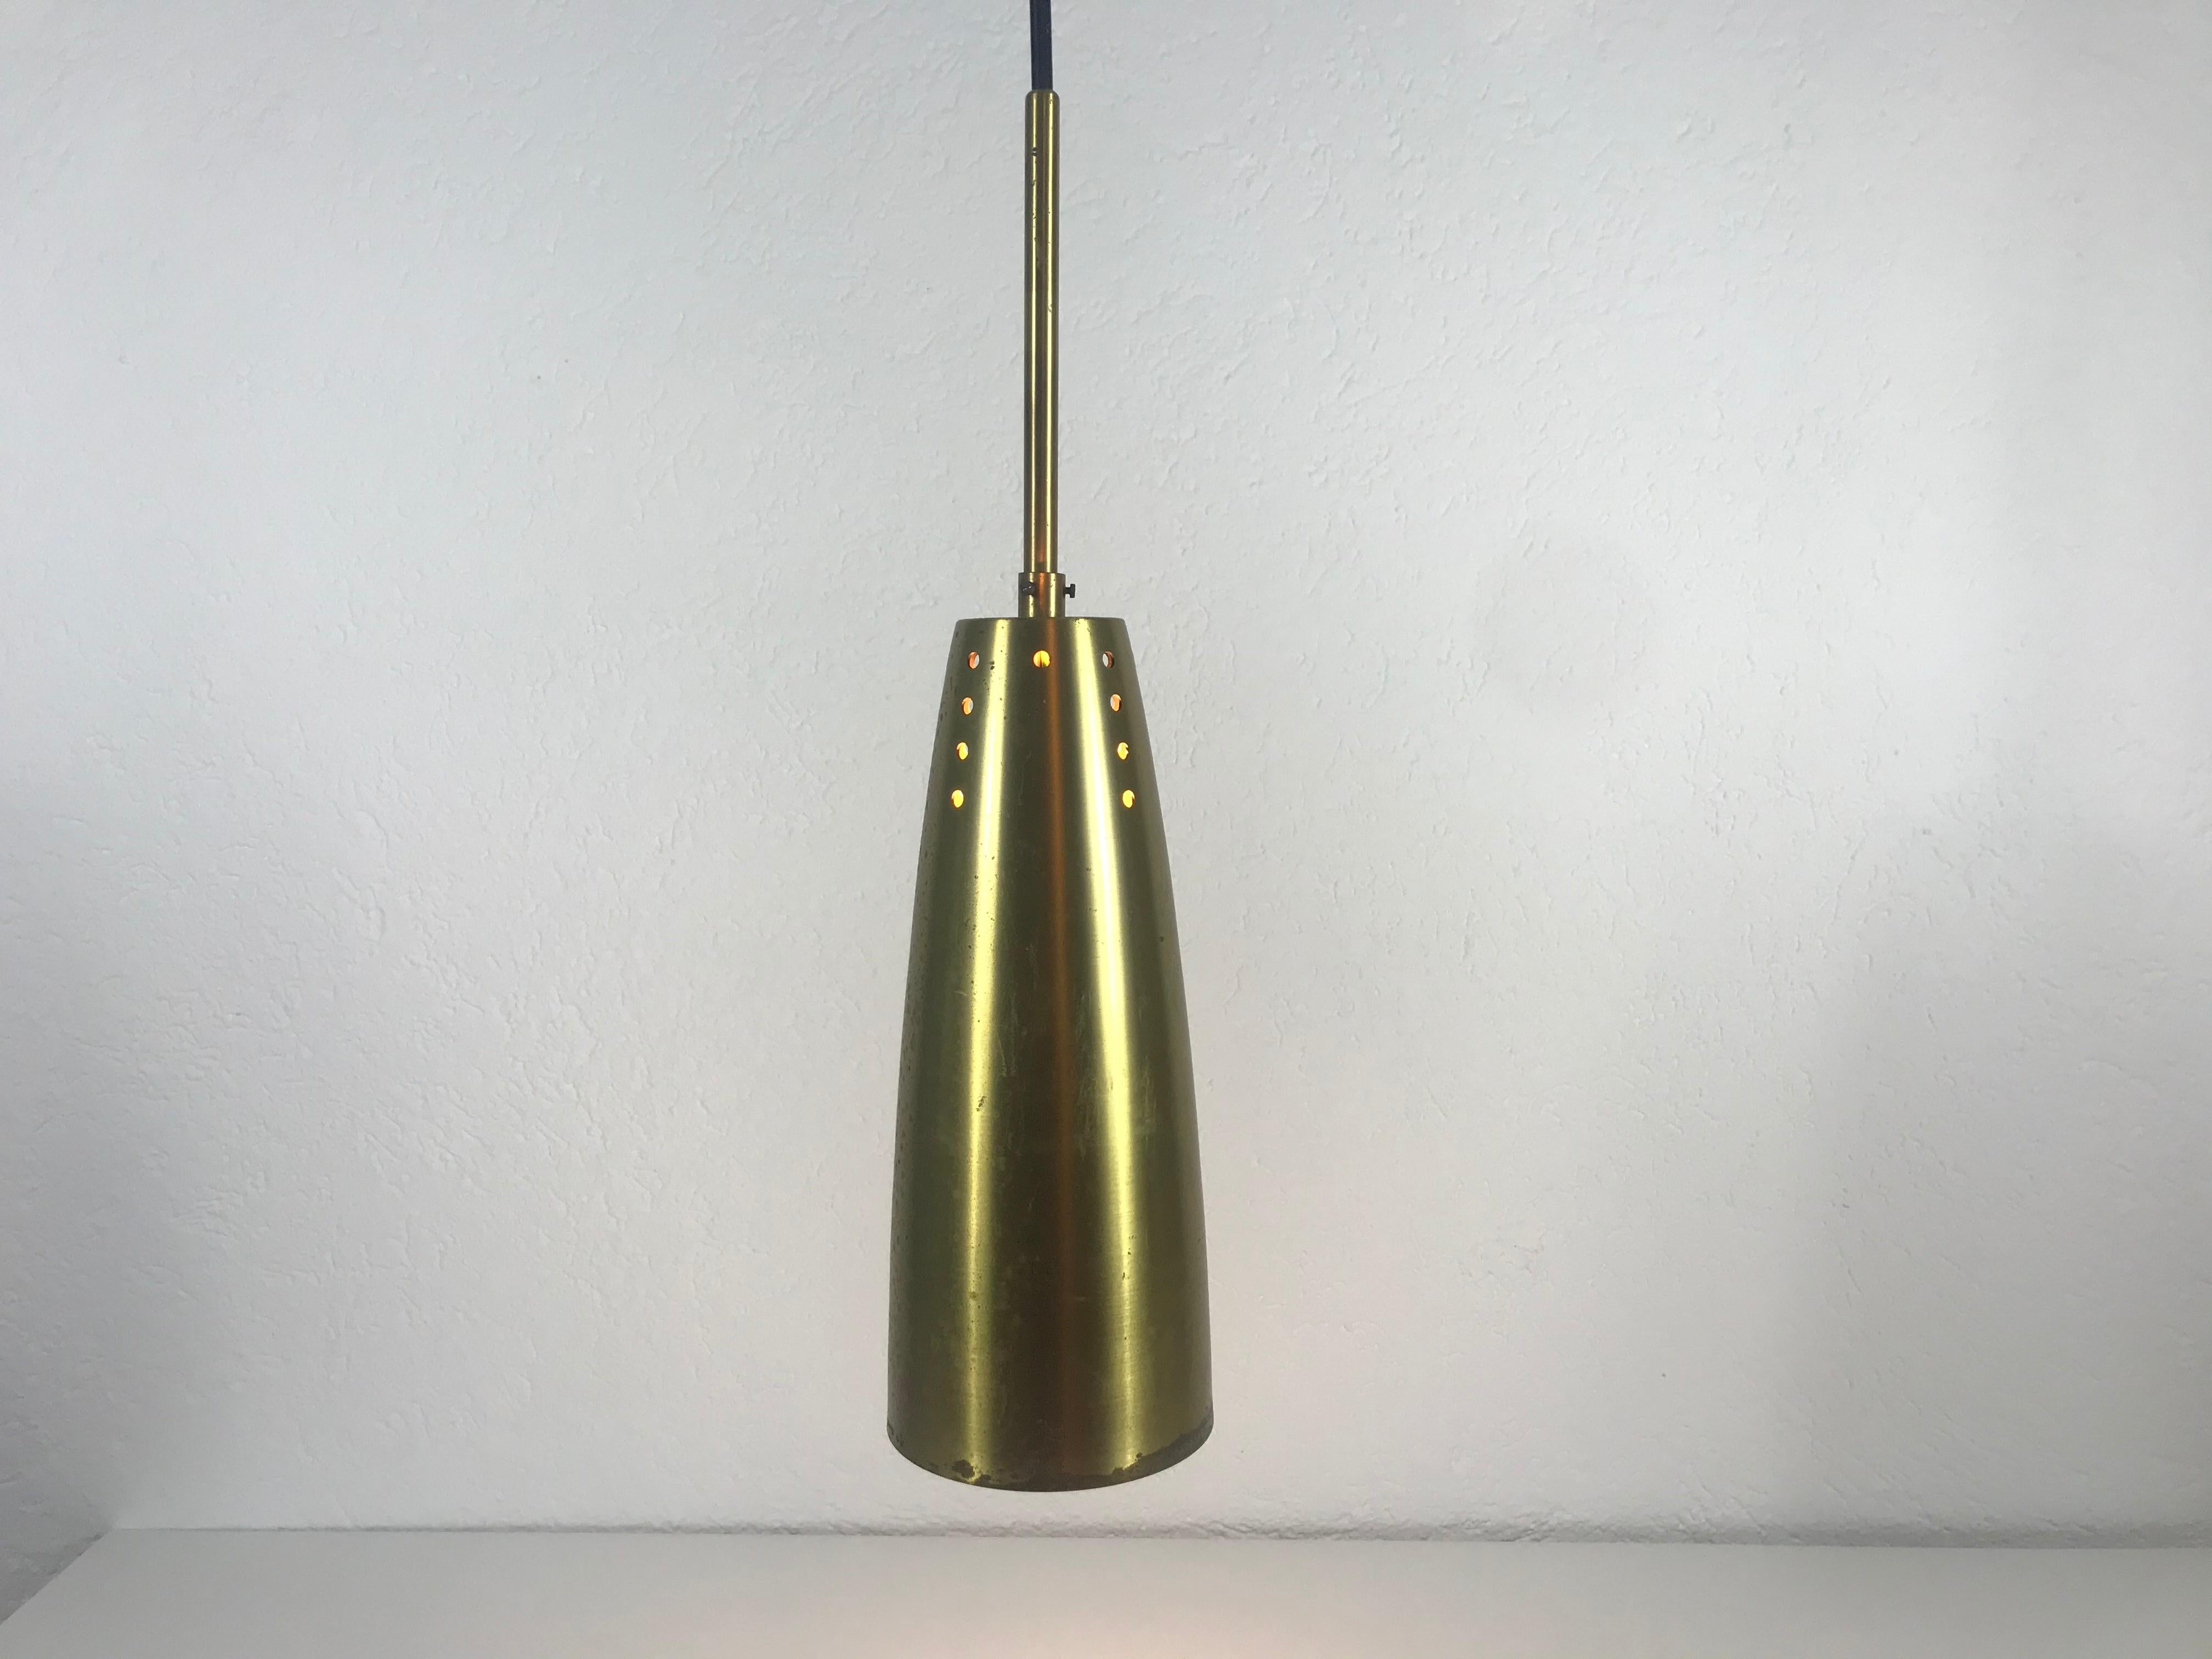 Pair of Full Brass Mid-Century Modern Pendant Lamps, 1950s, Germany For Sale 7